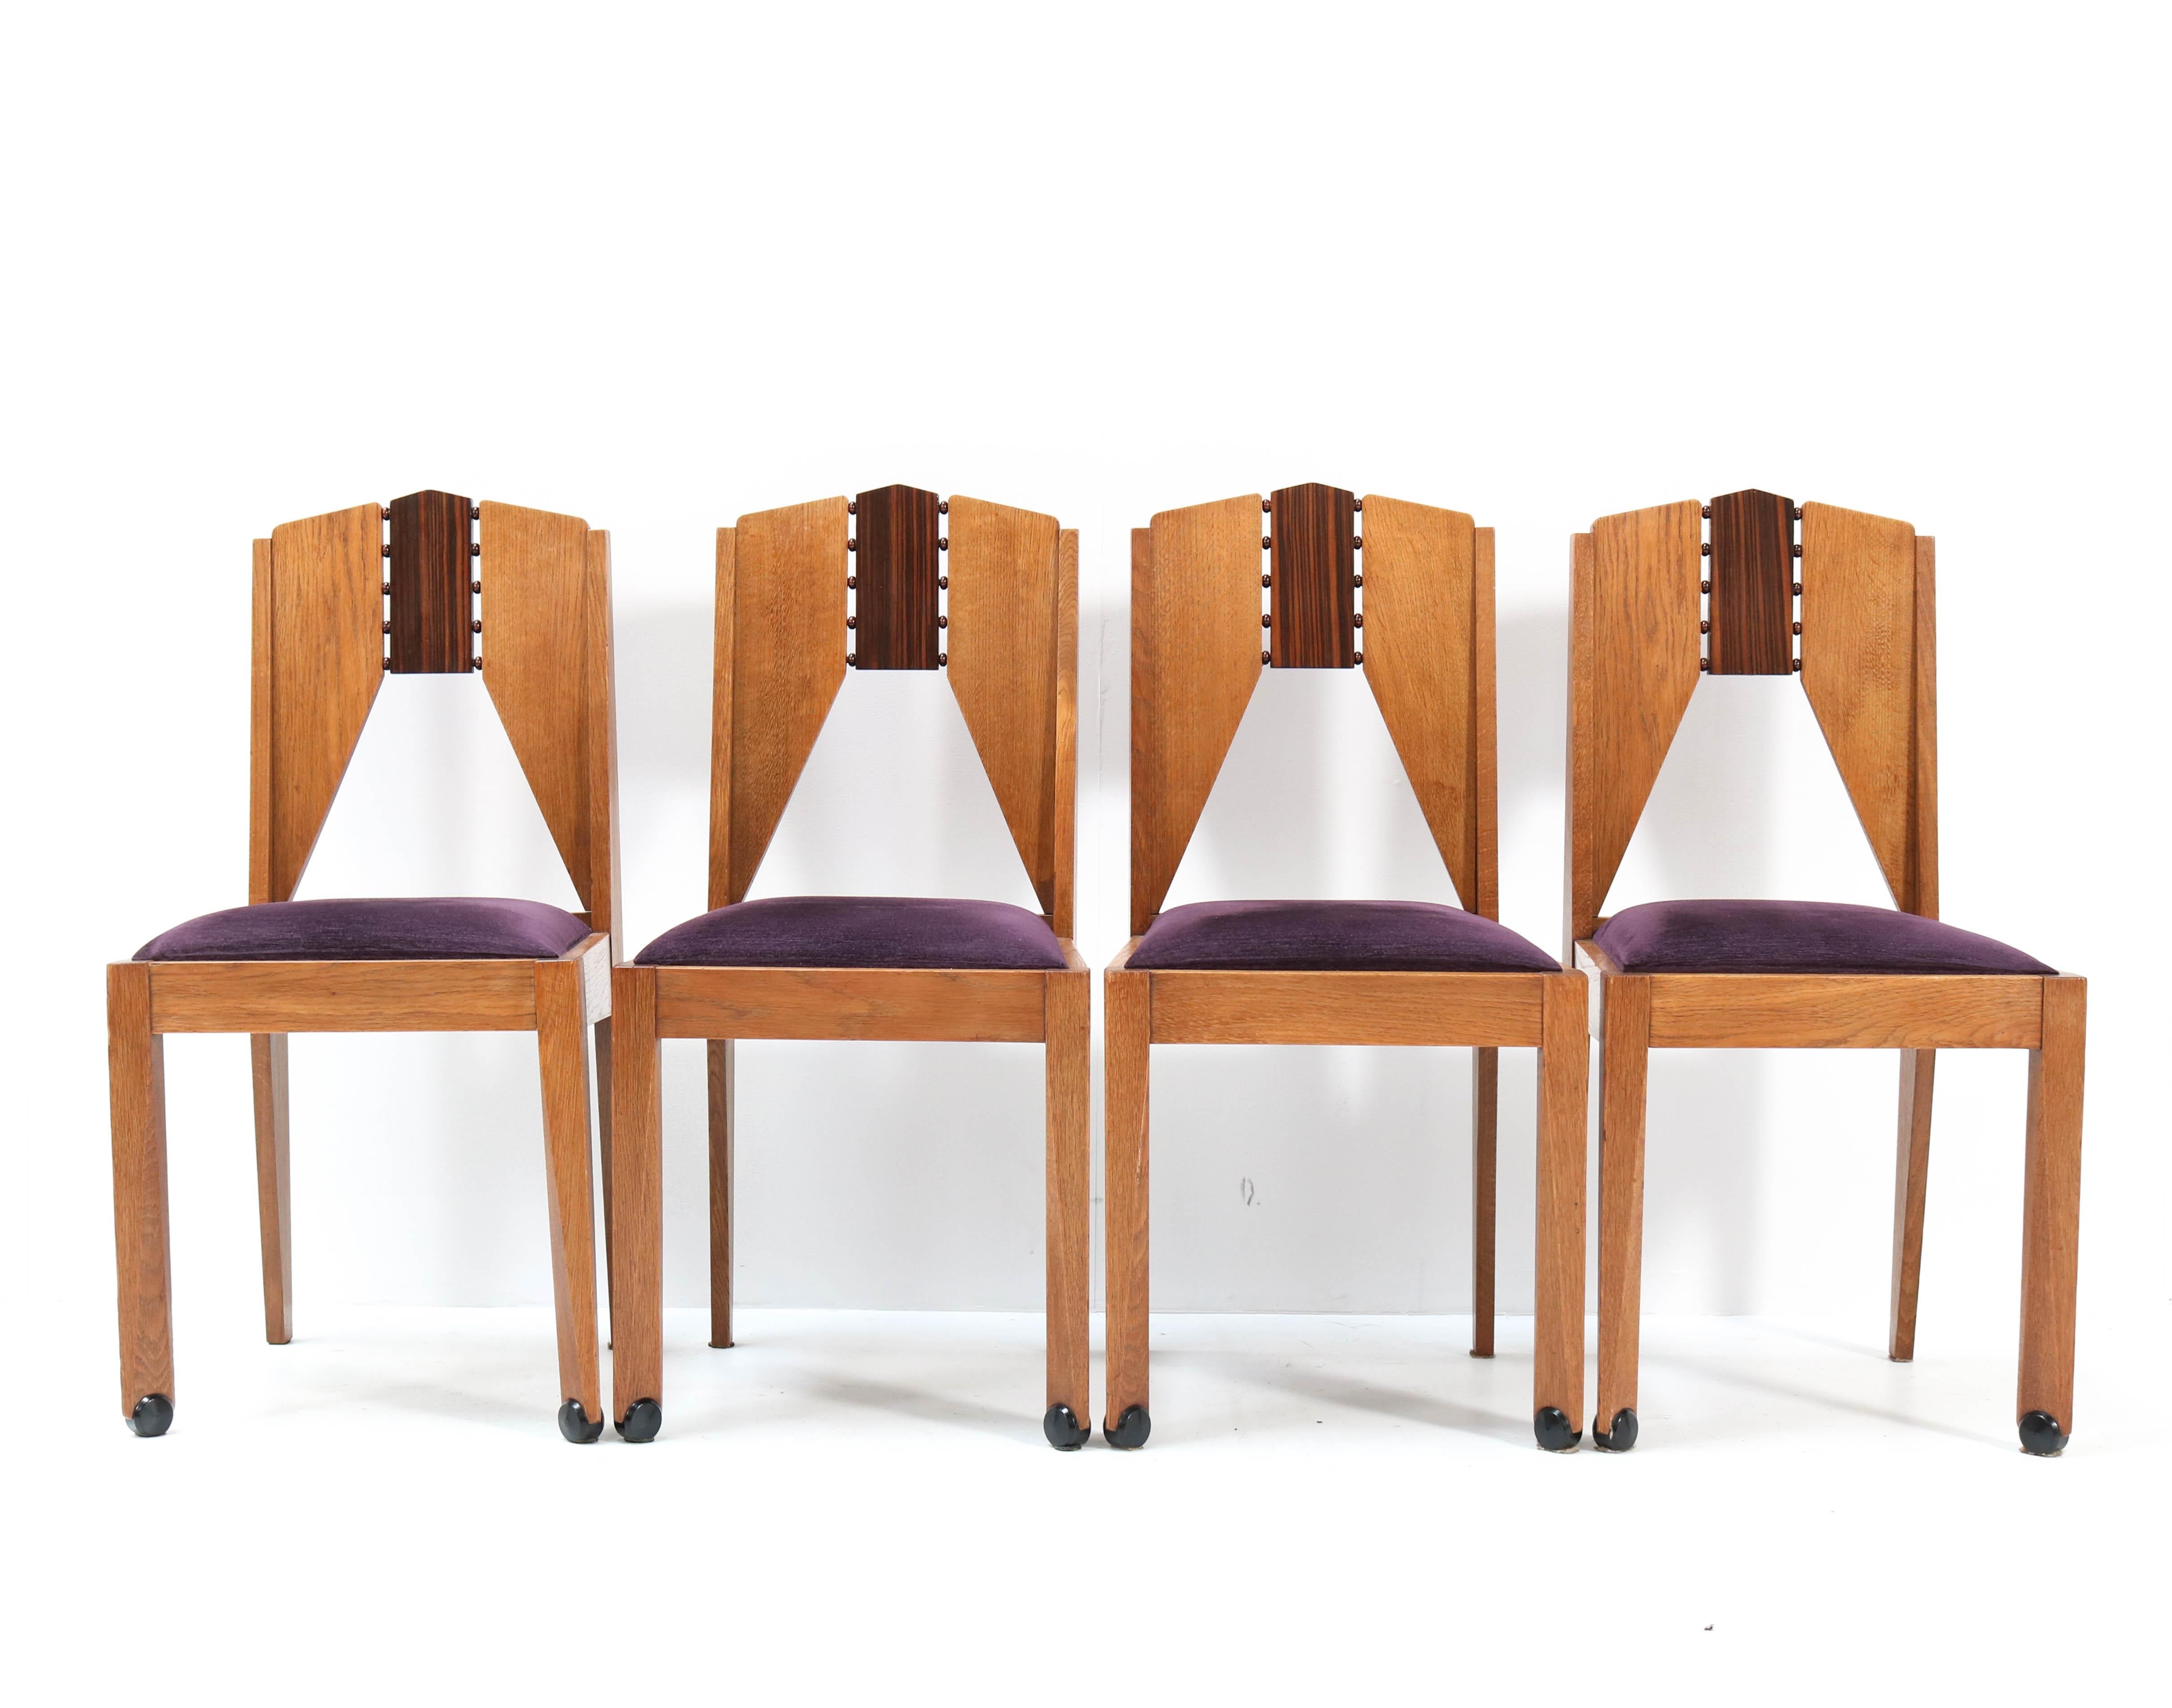 Wonderful set of four Art Deco Amsterdamse School chairs.
Design by J.J. Zijfers Amsterdam.
Striking Dutch design from the 1920s.
Soild oak and solid macassar ebony and macassar ebony veneer.
Re-upholstered with purple velvet fabric.
In very